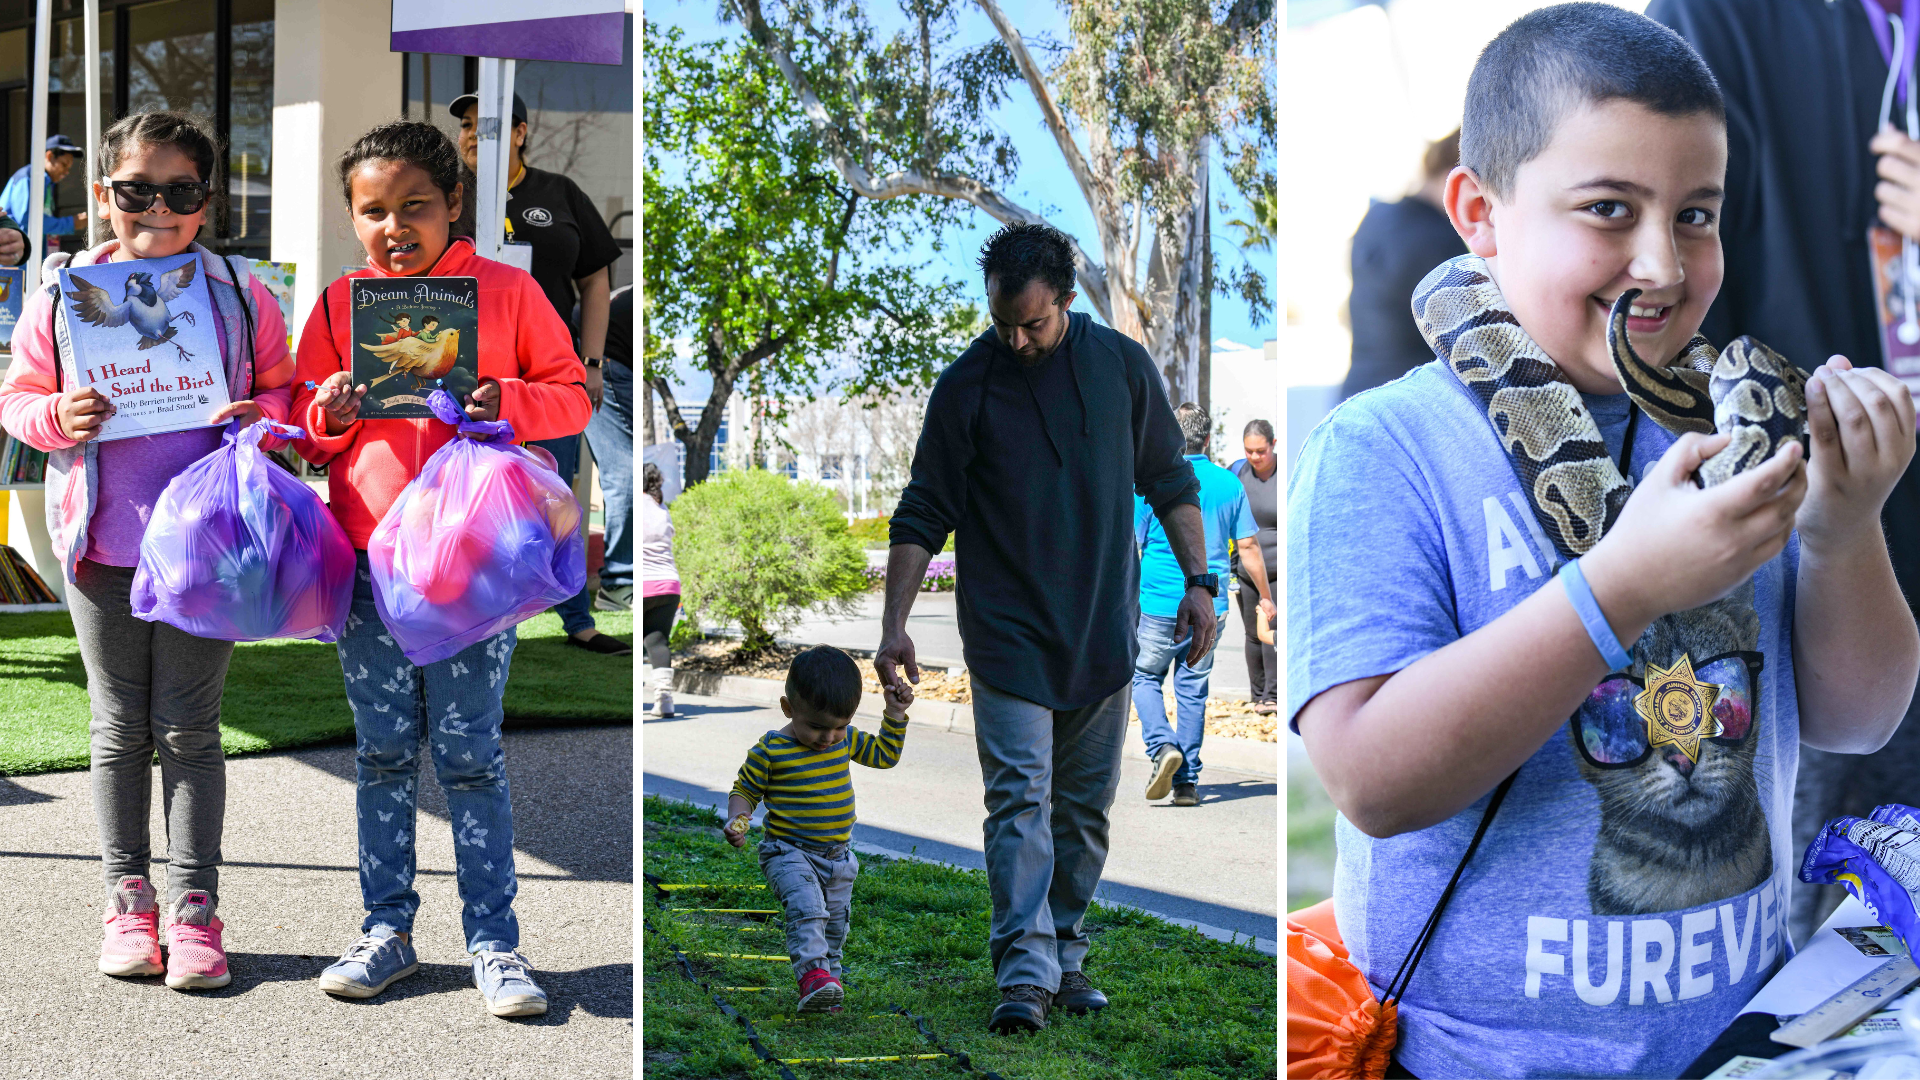 A collage from a previous San Bernardino Family Play Day event featuring two girls each holding out a book [left], a father holding their son’s hand as they walk [center], and a boy holding a snake and smiling at the camera [right]